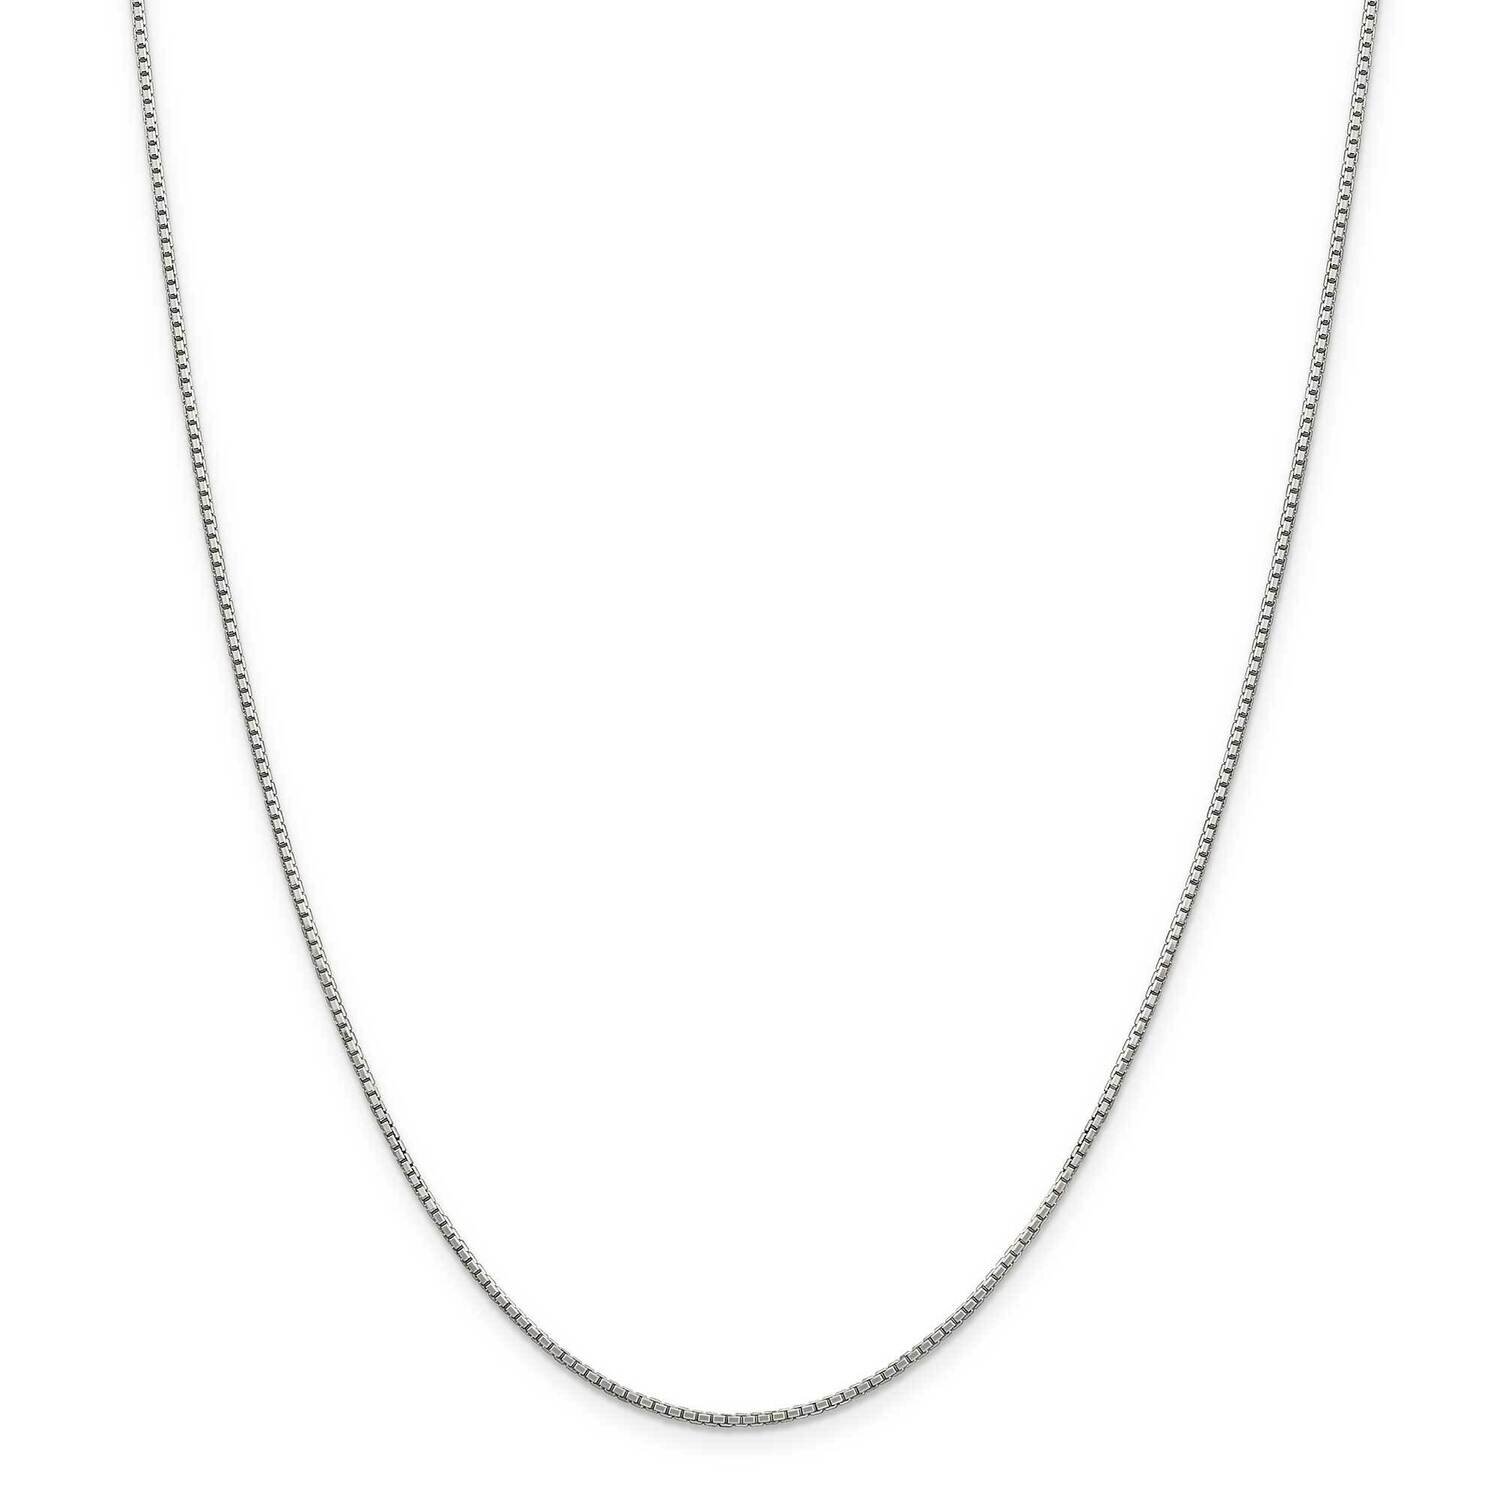 1.35mm 8 Sided Diamond-Cut Box Chain with 2 Inch Extender 18 Inch Sterling Silver QBR026E-18